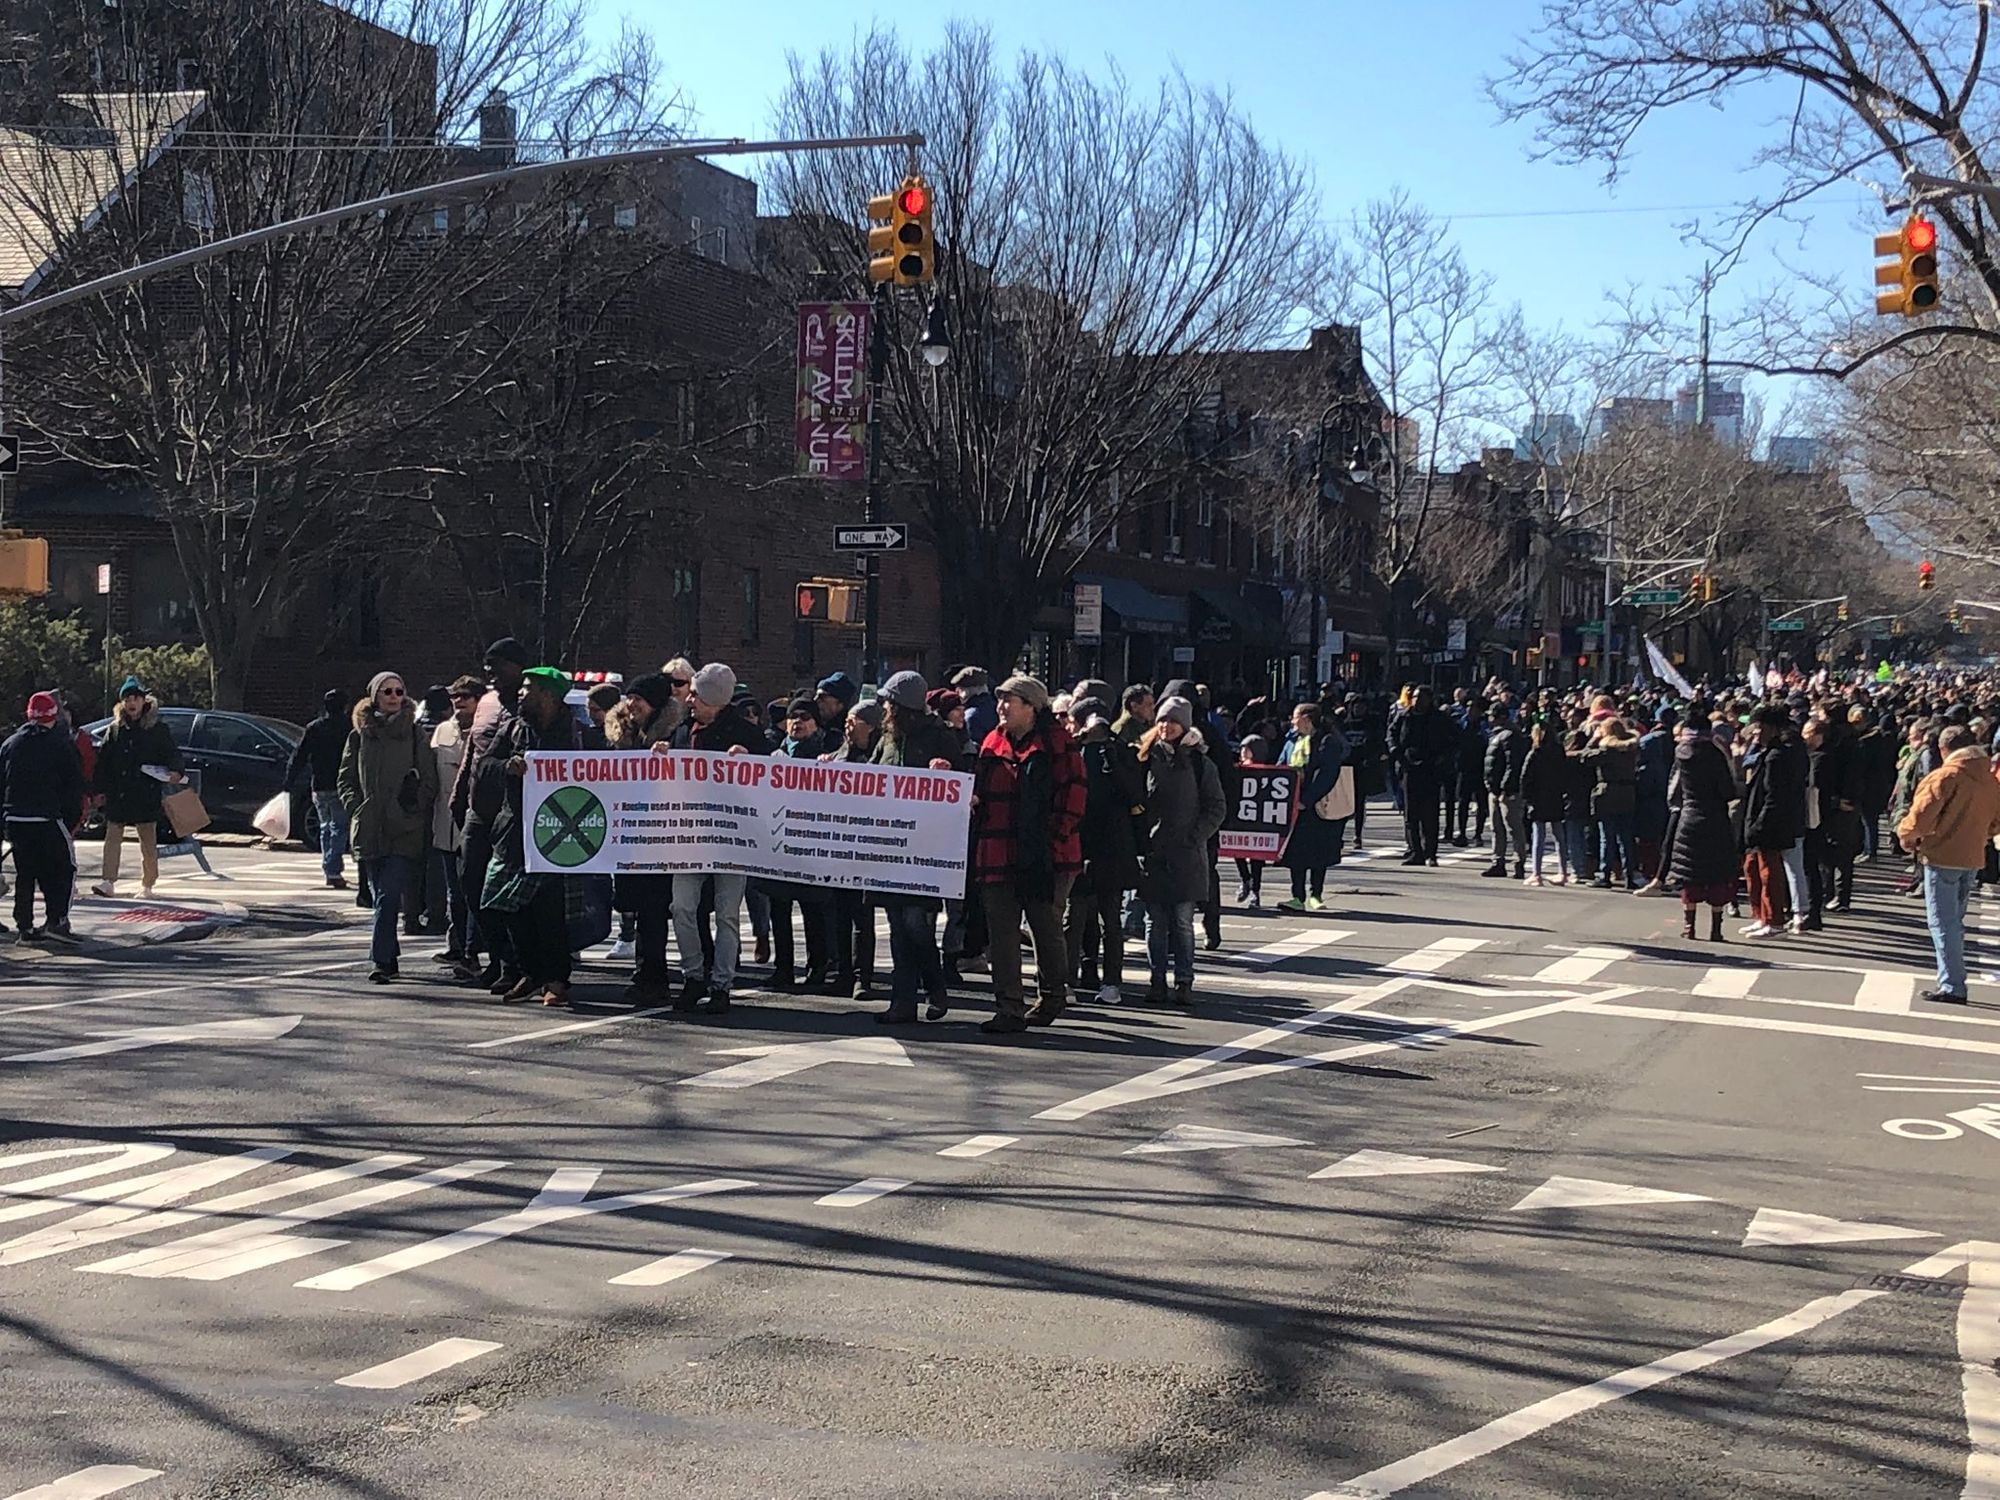 St. Pat's for All March - March 1, 2020